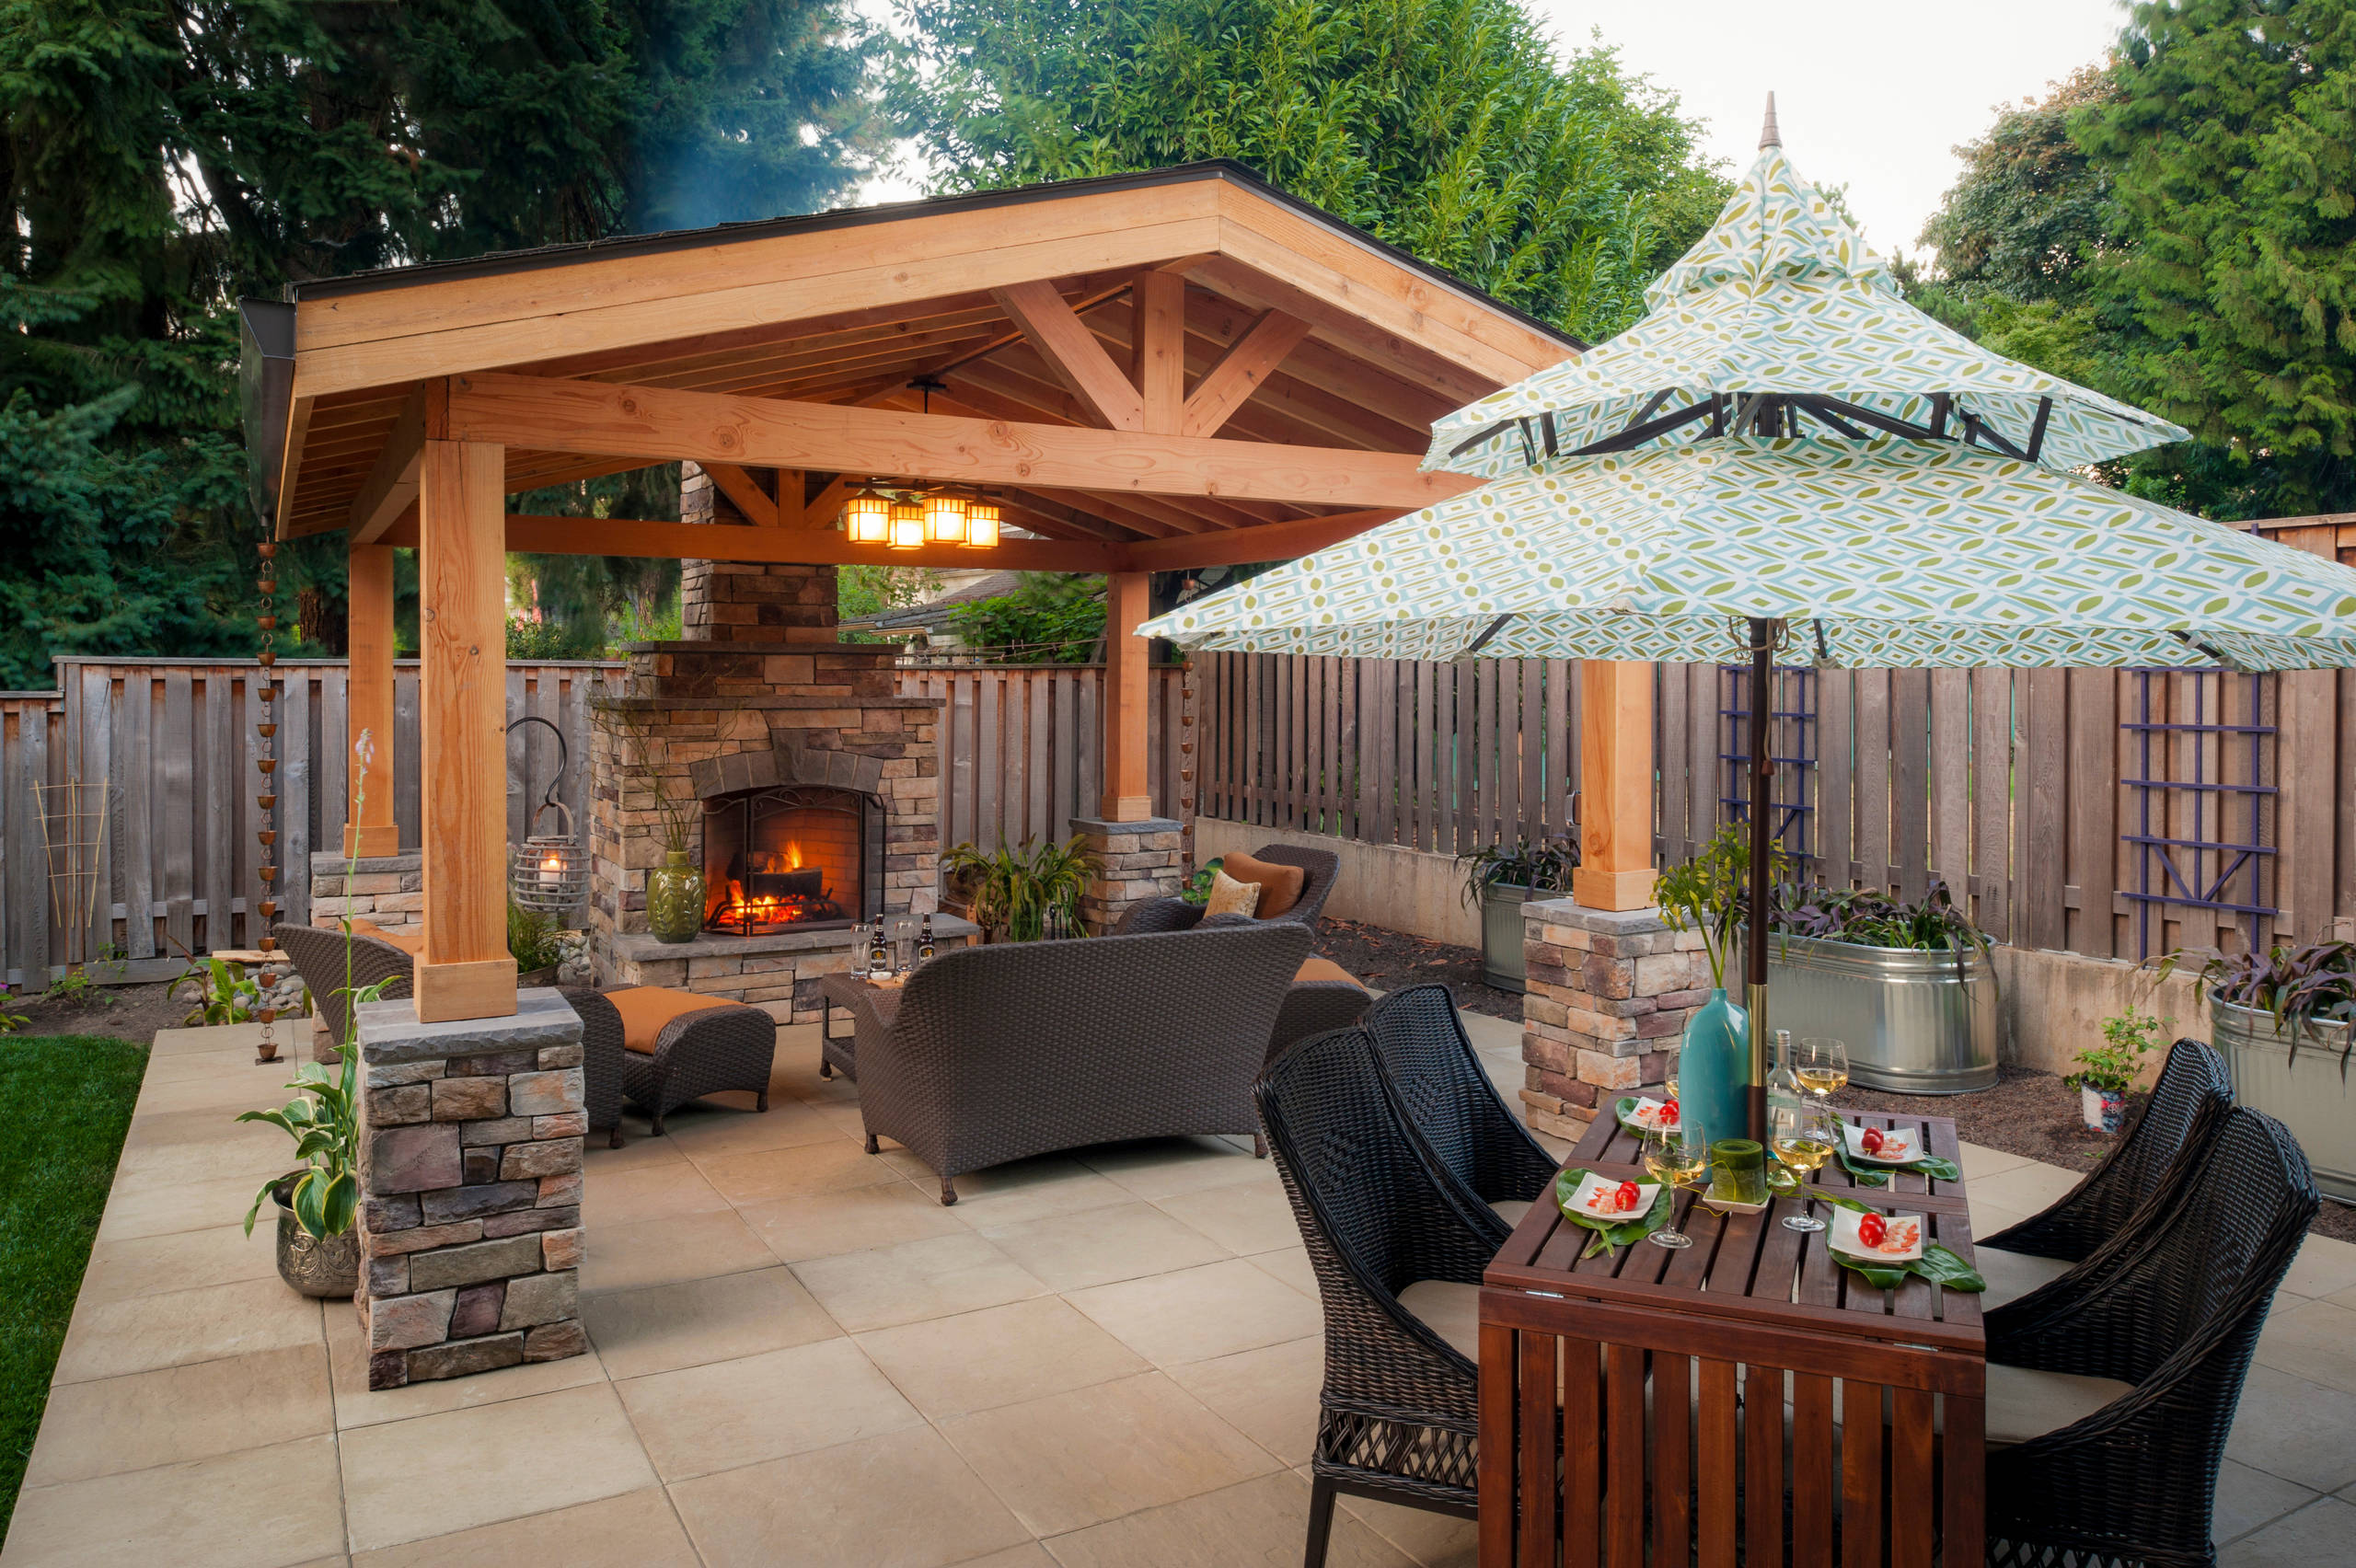 75 Outdoor with a Fire Pit and a Gazebo Ideas You'll Love - September, 2022  | Houzz